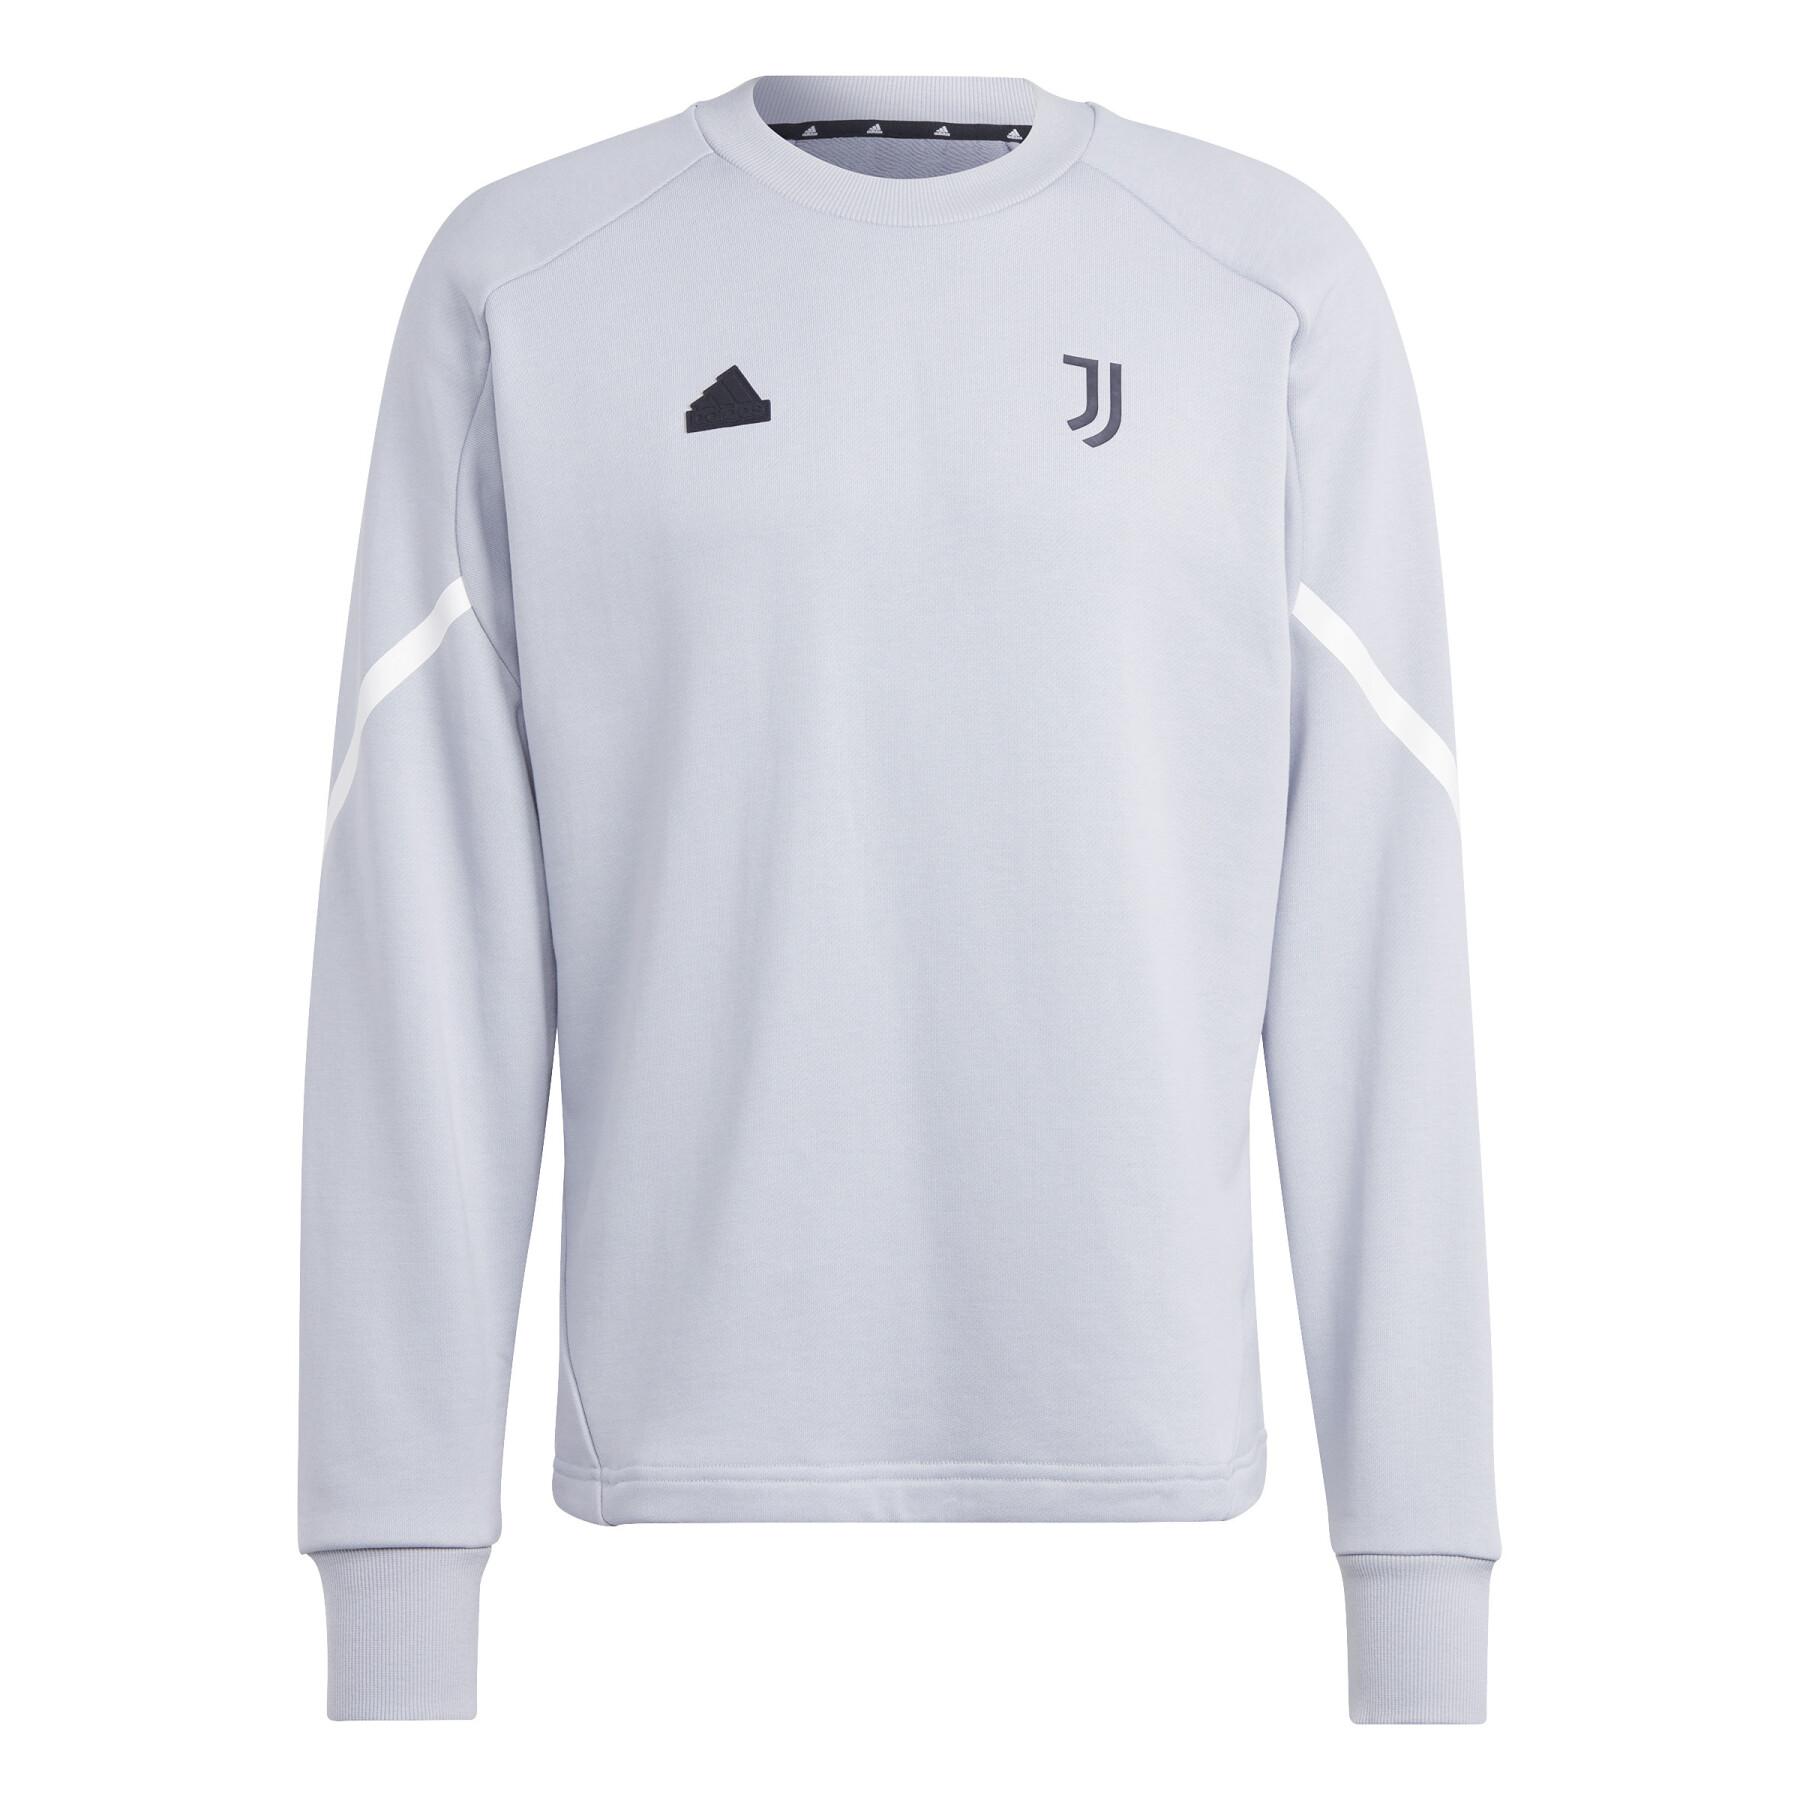 https://media.foot-store.it/catalog/product/cache/image/1800x/9df78eab33525d08d6e5fb8d27136e95/a/d/adidas_hz4979_2_apparel_photography_front_center_view_white.jpg